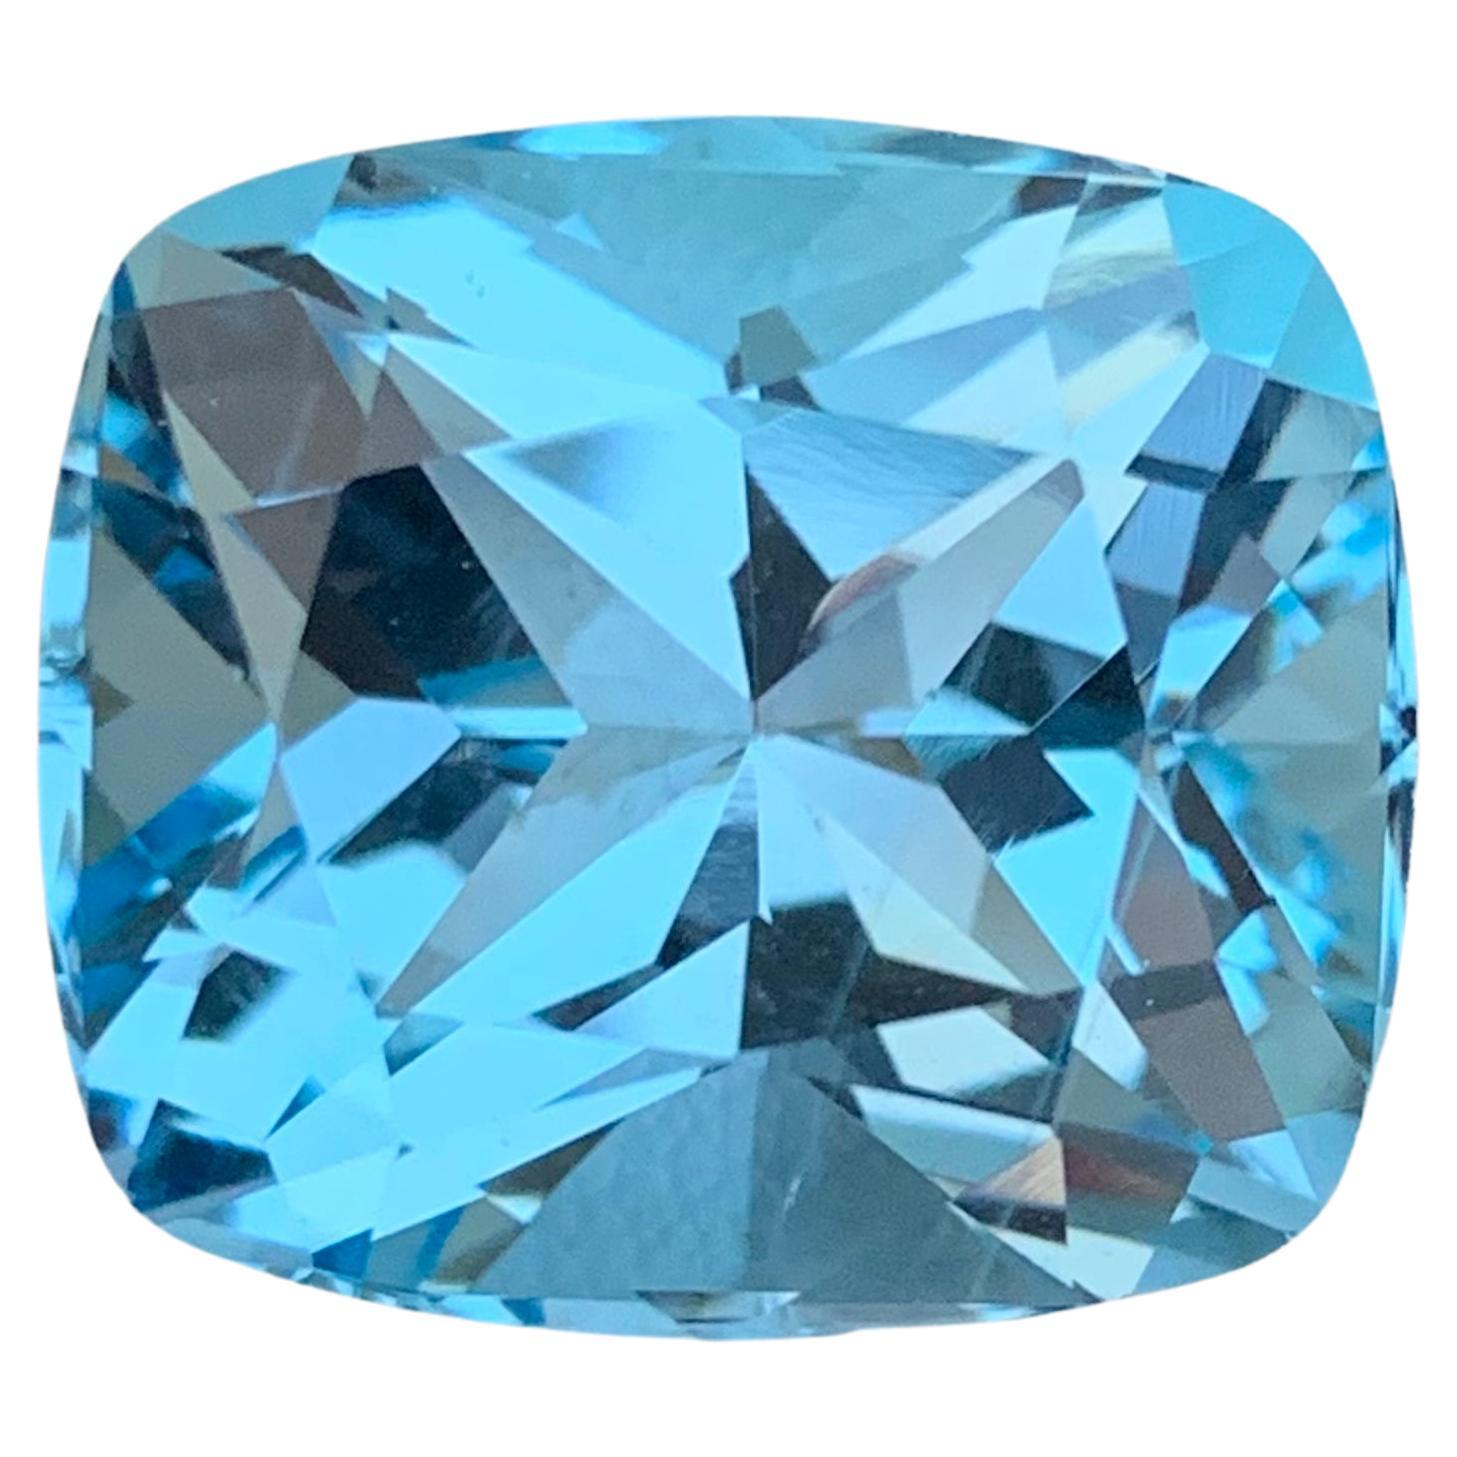 Gorgeous 22.25 Carats Faceted Sky Blue Topaz Cushion Cut Gem From Brazil Mine  For Sale